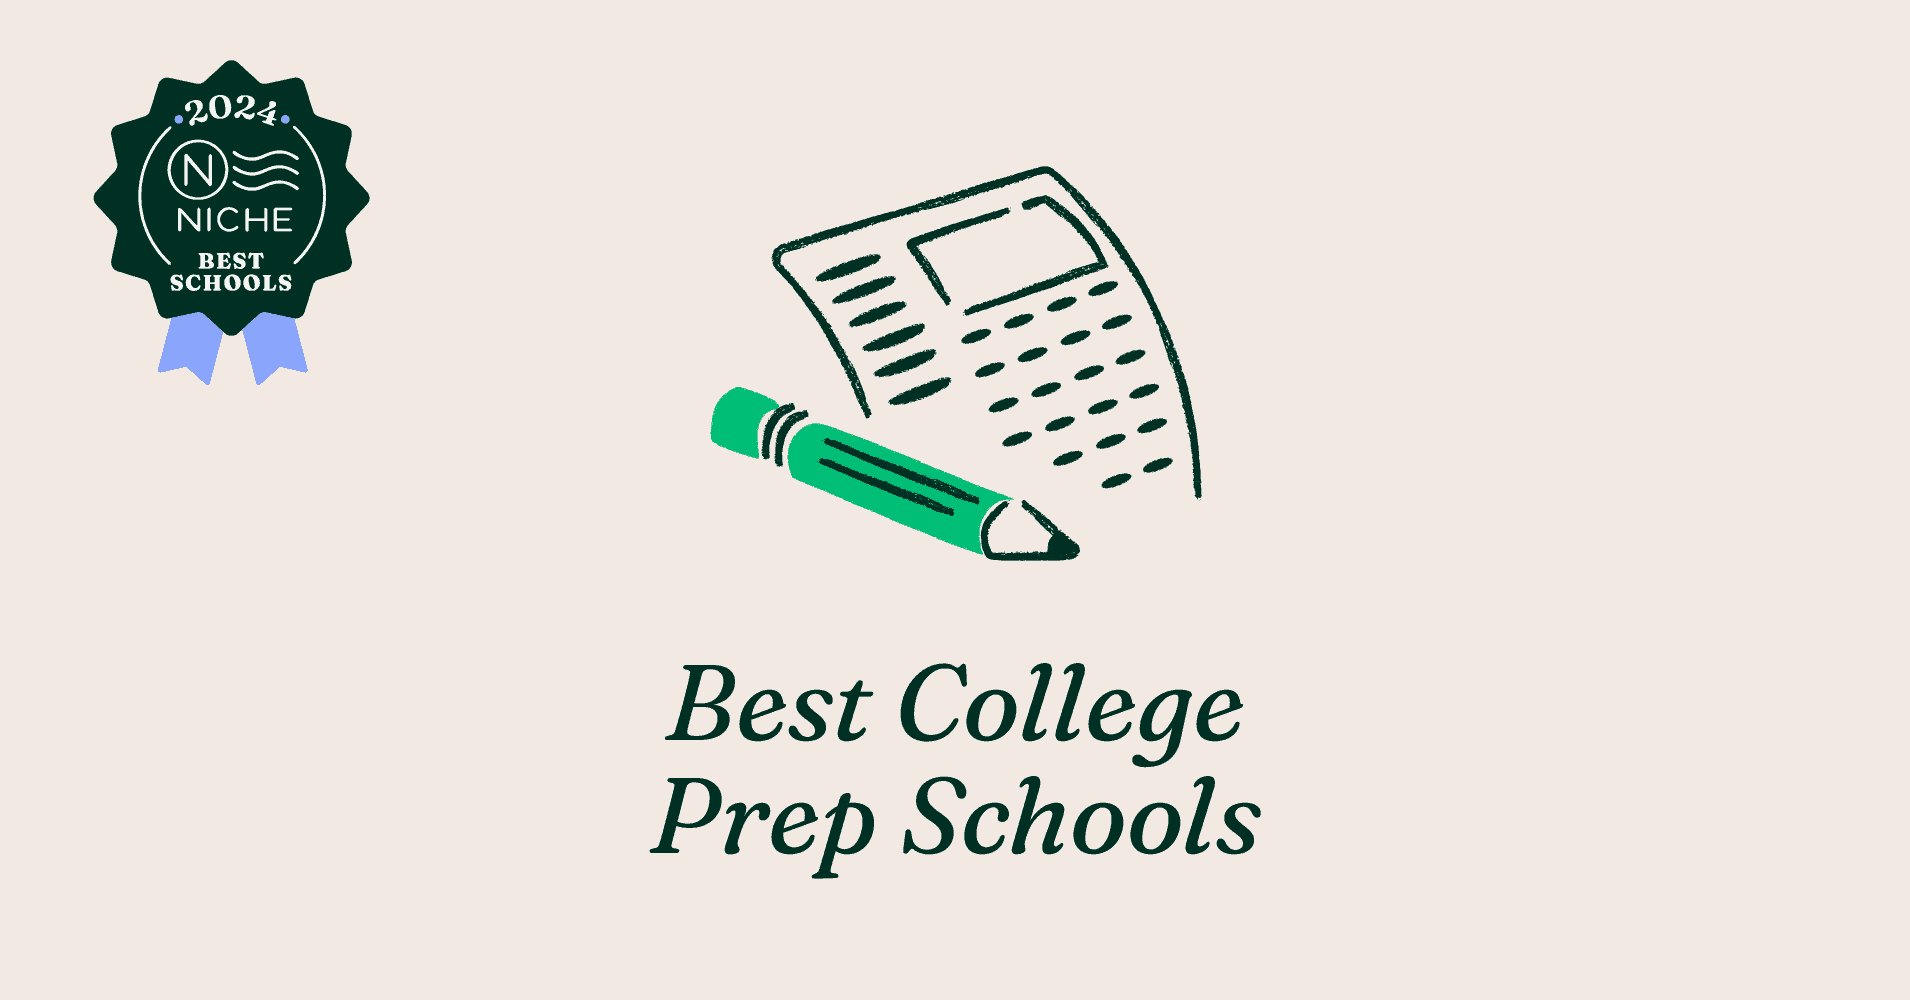 University School of the Lowcountry is a proud 2024 NICHE Best College Prep School honoree.